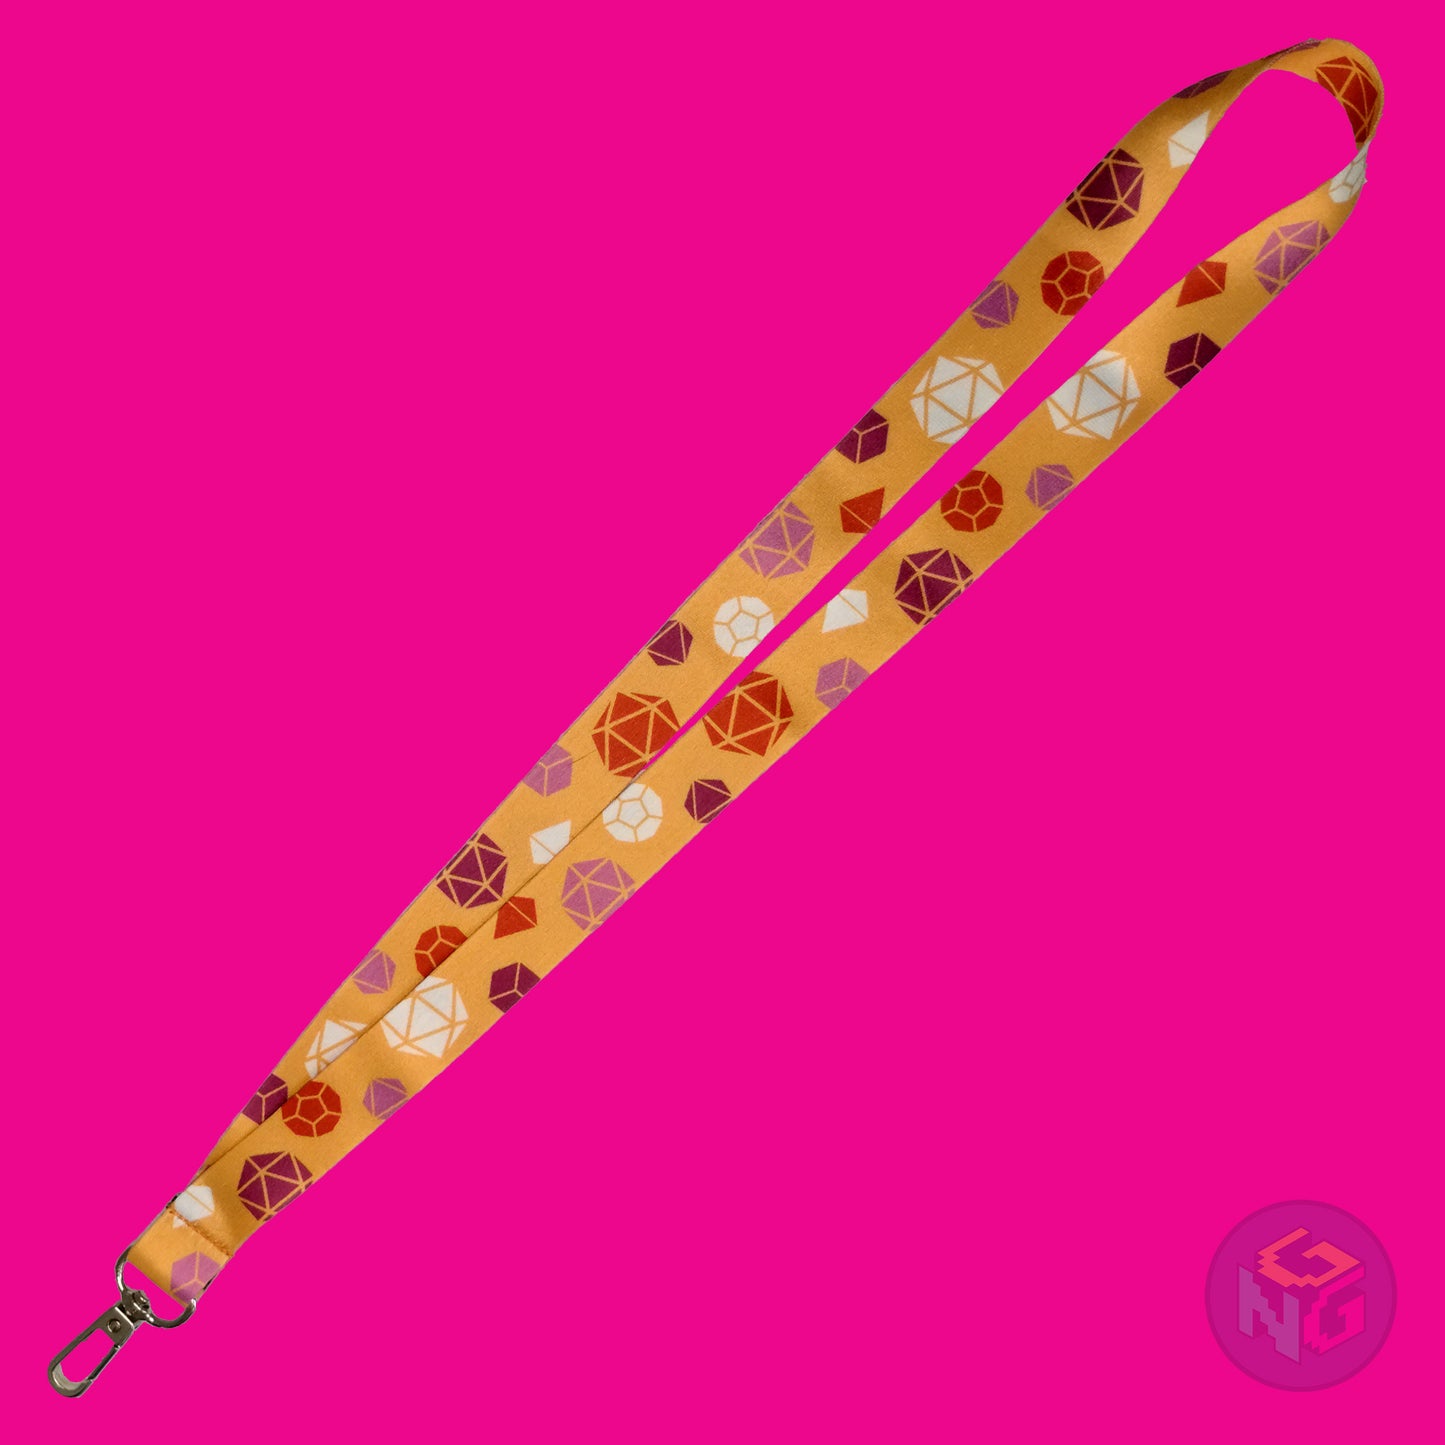 the lesbian dice lanyard lying flat showing the complete design and repeating pattern of polyhedral dice in lesbian colors